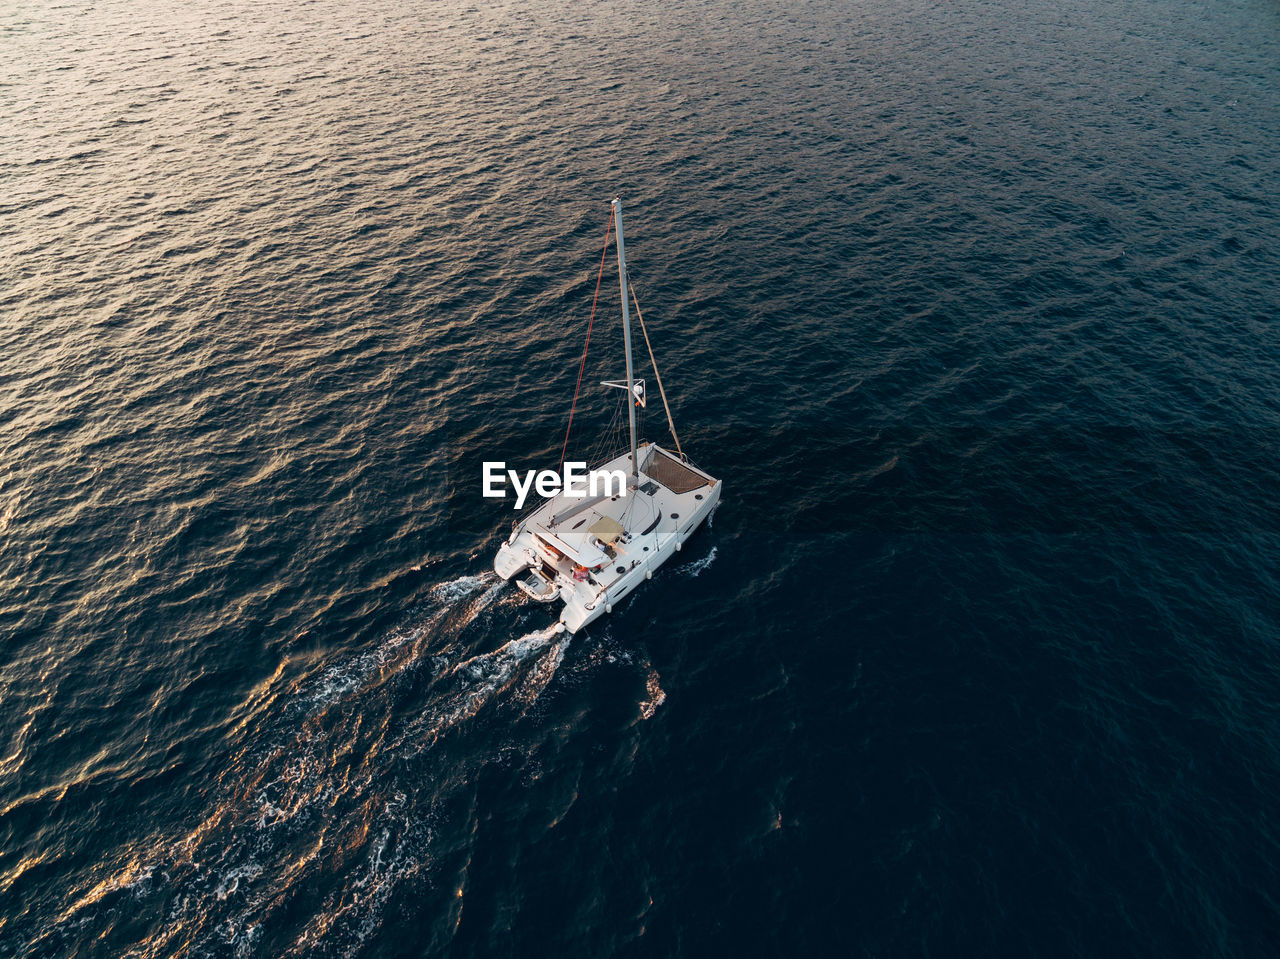 HIGH ANGLE VIEW OF SAILBOAT IN SEA